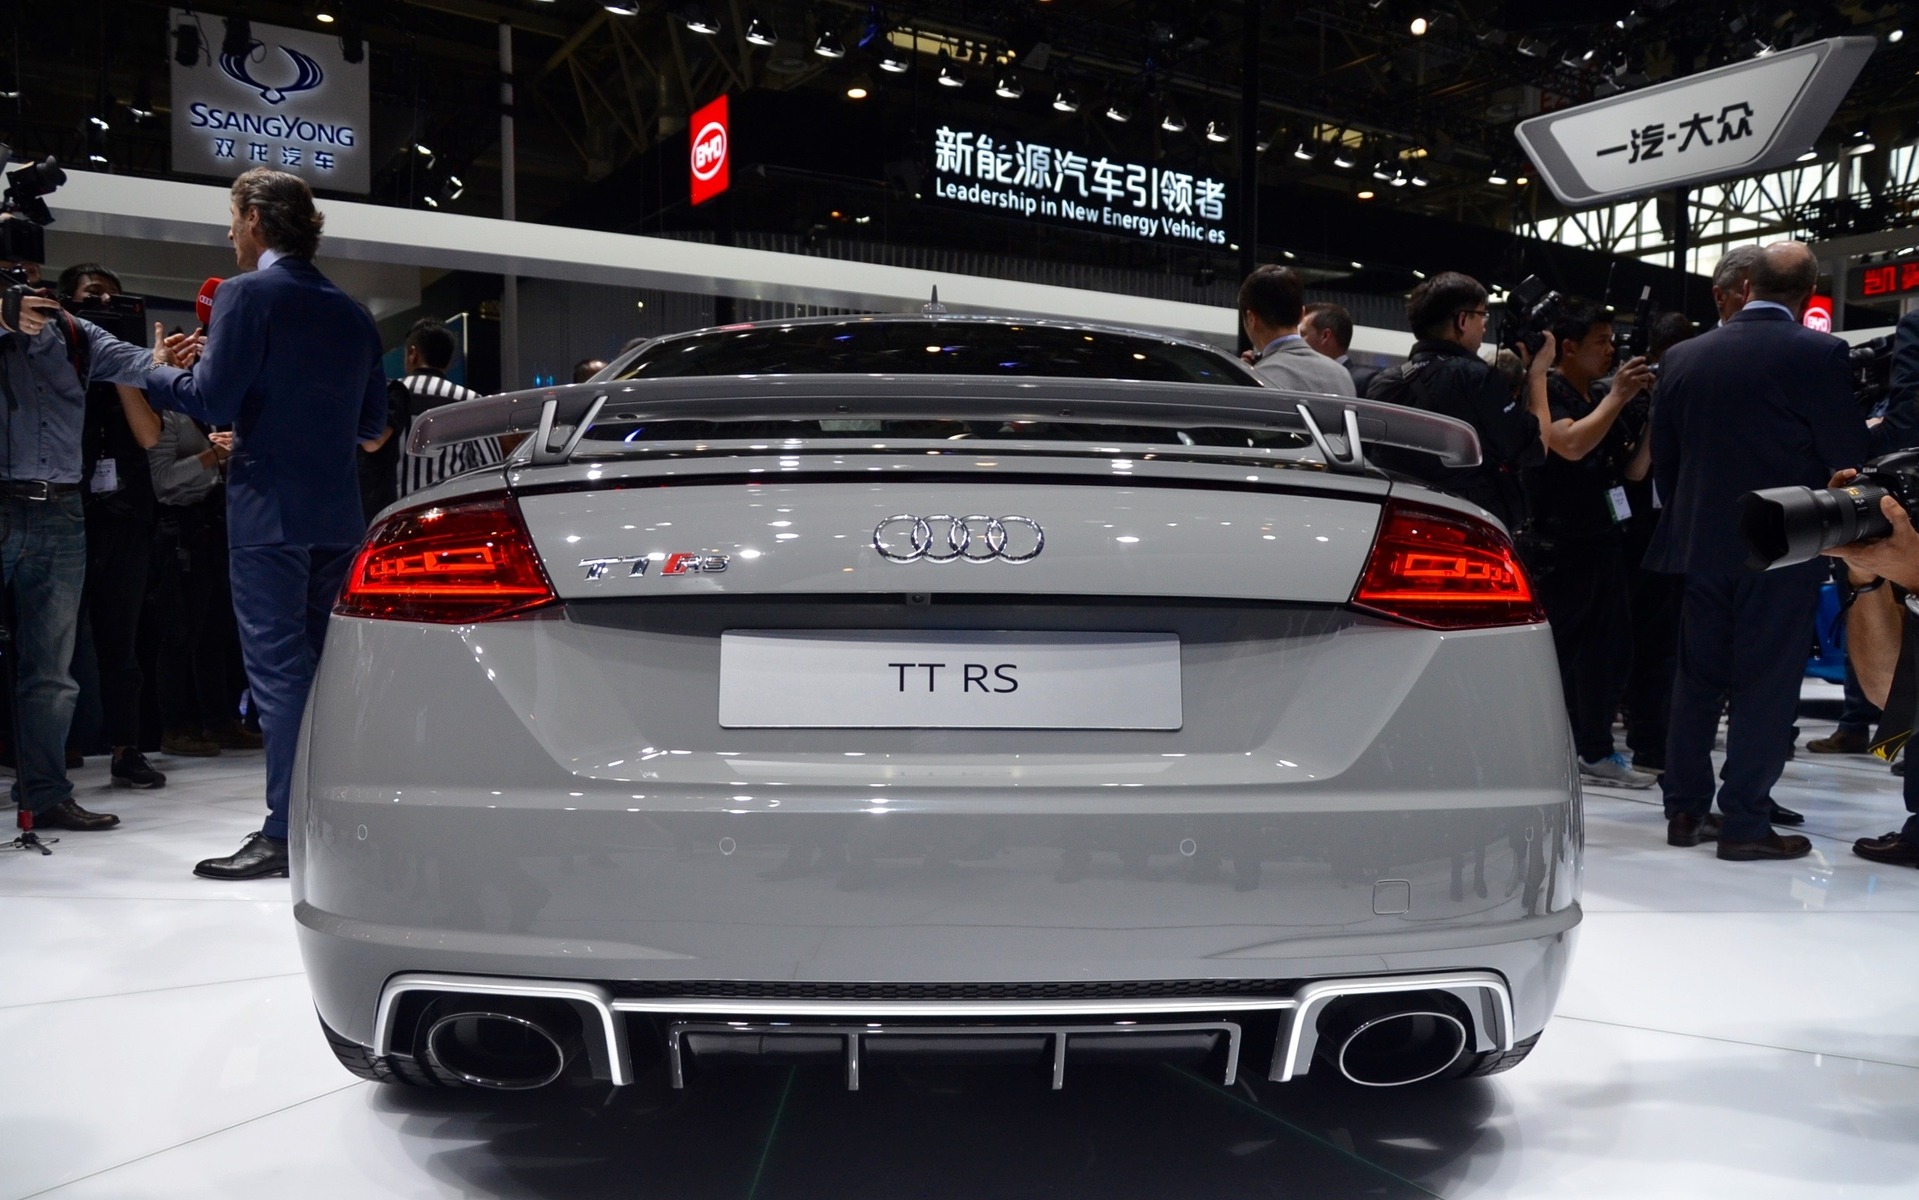 Audi TT RS unveiled at the 2016 Beijing Auto Show